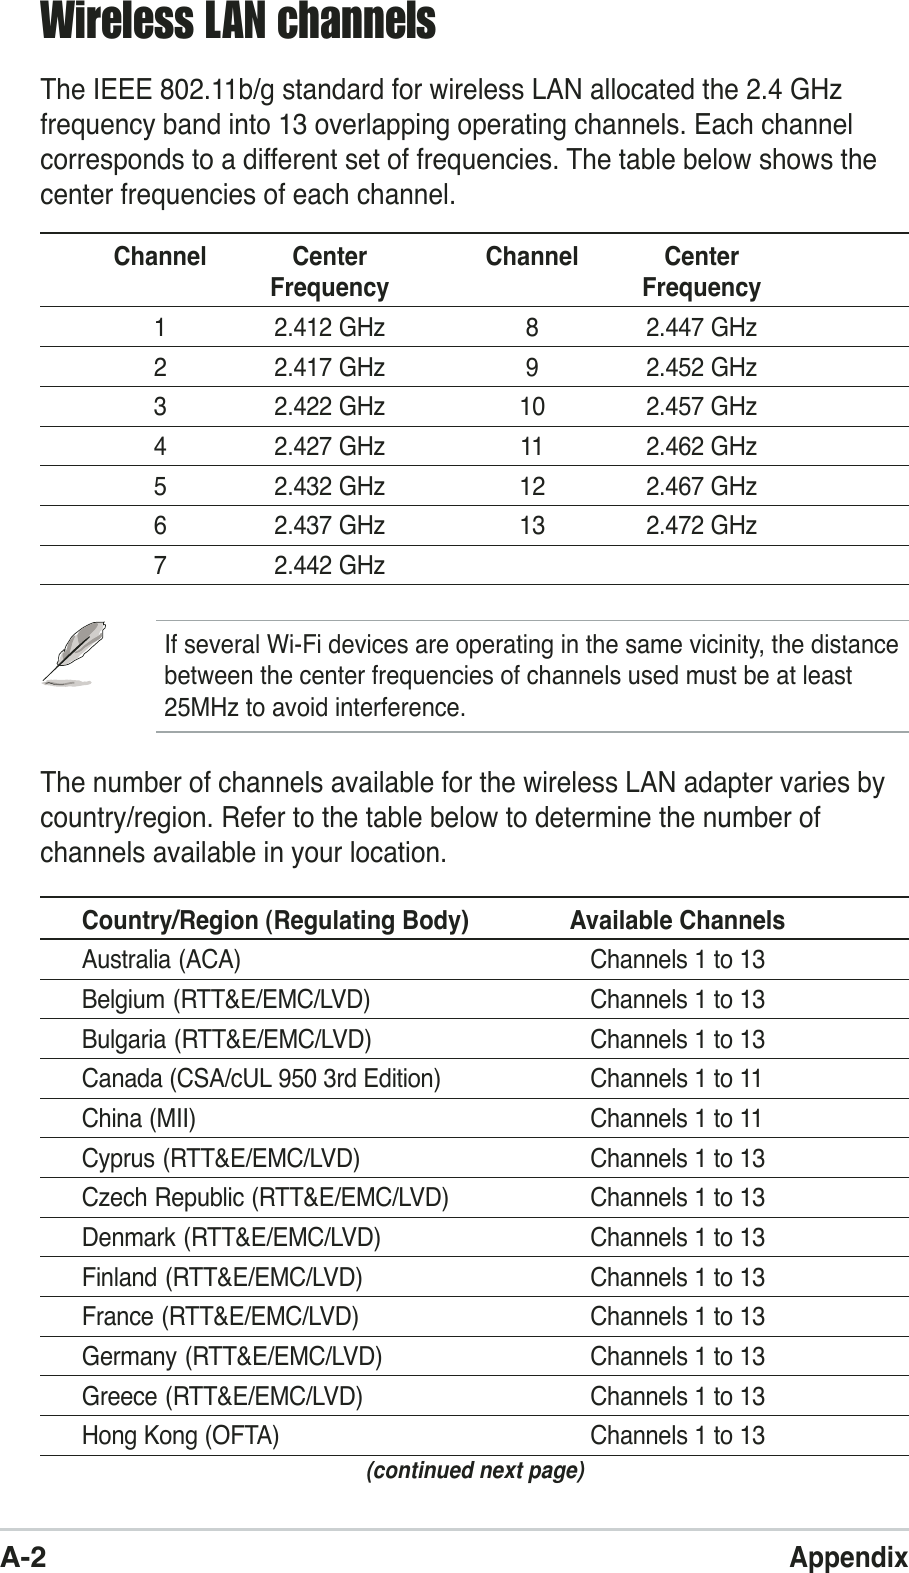 A-2AppendixWireless LAN channelsThe IEEE 802.11b/g standard for wireless LAN allocated the 2.4 GHzfrequency band into 13 overlapping operating channels. Each channelcorresponds to a different set of frequencies. The table below shows thecenter frequencies of each channel.Channel Center Channel CenterFrequency Frequency1 2.412 GHz 8 2.447 GHz2 2.417 GHz 9 2.452 GHz3 2.422 GHz 10 2.457 GHz4 2.427 GHz 11 2.462 GHz5 2.432 GHz 12 2.467 GHz6 2.437 GHz 13 2.472 GHz7 2.442 GHzThe number of channels available for the wireless LAN adapter varies bycountry/region. Refer to the table below to determine the number ofchannels available in your location.Country/Region (Regulating Body) Available ChannelsAustralia (ACA) Channels 1 to 13Belgium (RTT&amp;E/EMC/LVD) Channels 1 to 13Bulgaria (RTT&amp;E/EMC/LVD) Channels 1 to 13Canada (CSA/cUL 950 3rd Edition) Channels 1 to 11China (MII) Channels 1 to 11Cyprus (RTT&amp;E/EMC/LVD) Channels 1 to 13Czech Republic (RTT&amp;E/EMC/LVD) Channels 1 to 13Denmark (RTT&amp;E/EMC/LVD) Channels 1 to 13Finland (RTT&amp;E/EMC/LVD) Channels 1 to 13France (RTT&amp;E/EMC/LVD) Channels 1 to 13Germany (RTT&amp;E/EMC/LVD) Channels 1 to 13Greece (RTT&amp;E/EMC/LVD) Channels 1 to 13Hong Kong (OFTA) Channels 1 to 13(continued next page)If several Wi-Fi devices are operating in the same vicinity, the distancebetween the center frequencies of channels used must be at least25MHz to avoid interference.